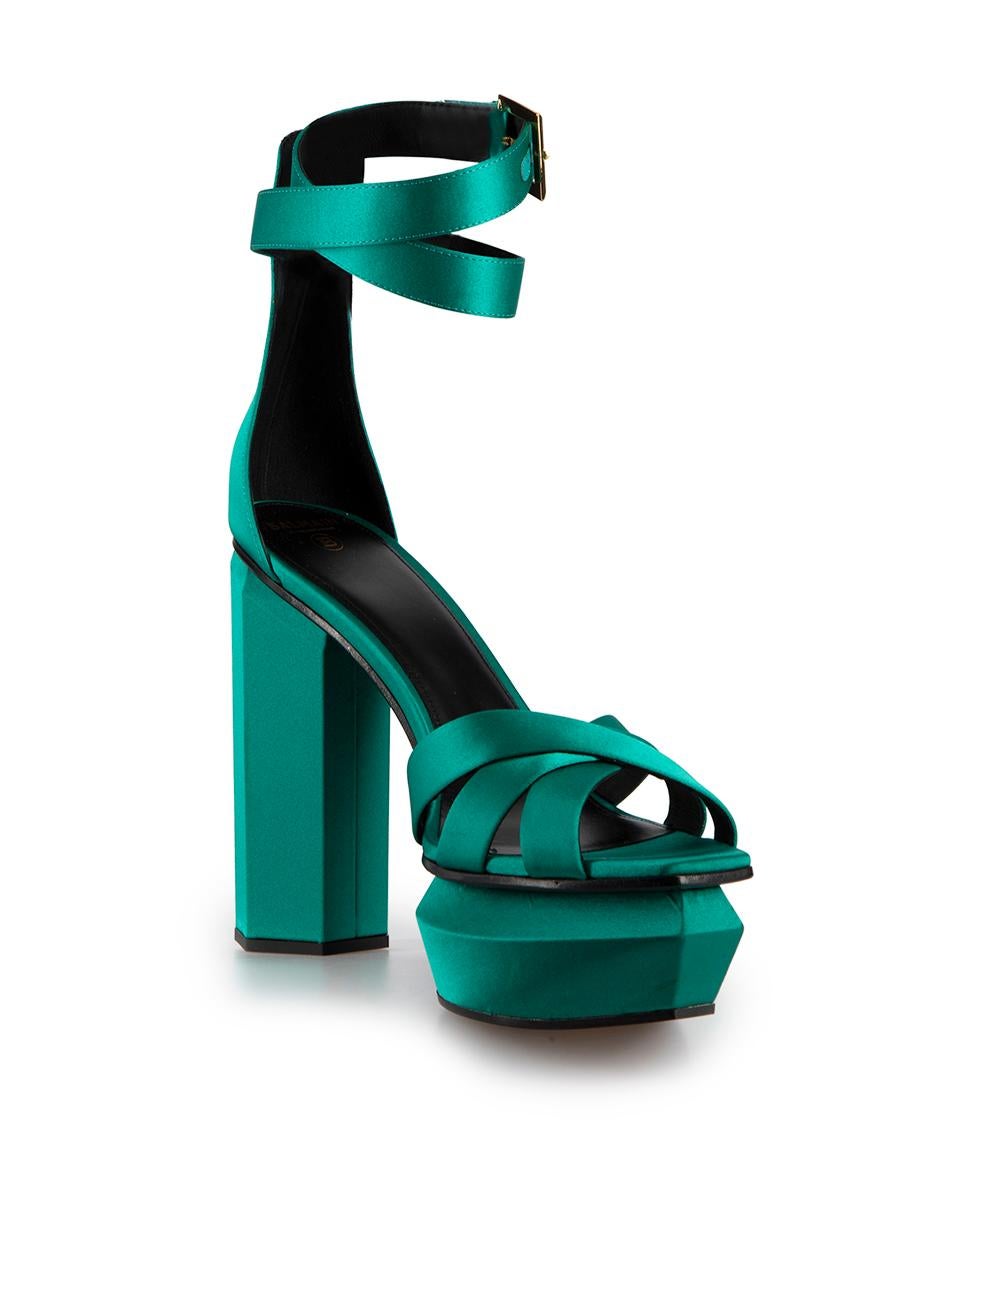 CONDITION is Never worn, with tags. No visible wear to sandals is evident on this new Balmain designer resale item. This item comes with original box.



Details


Green

Satin

Sandals

Open square toe

Platform high heel

Ankle buckled strap